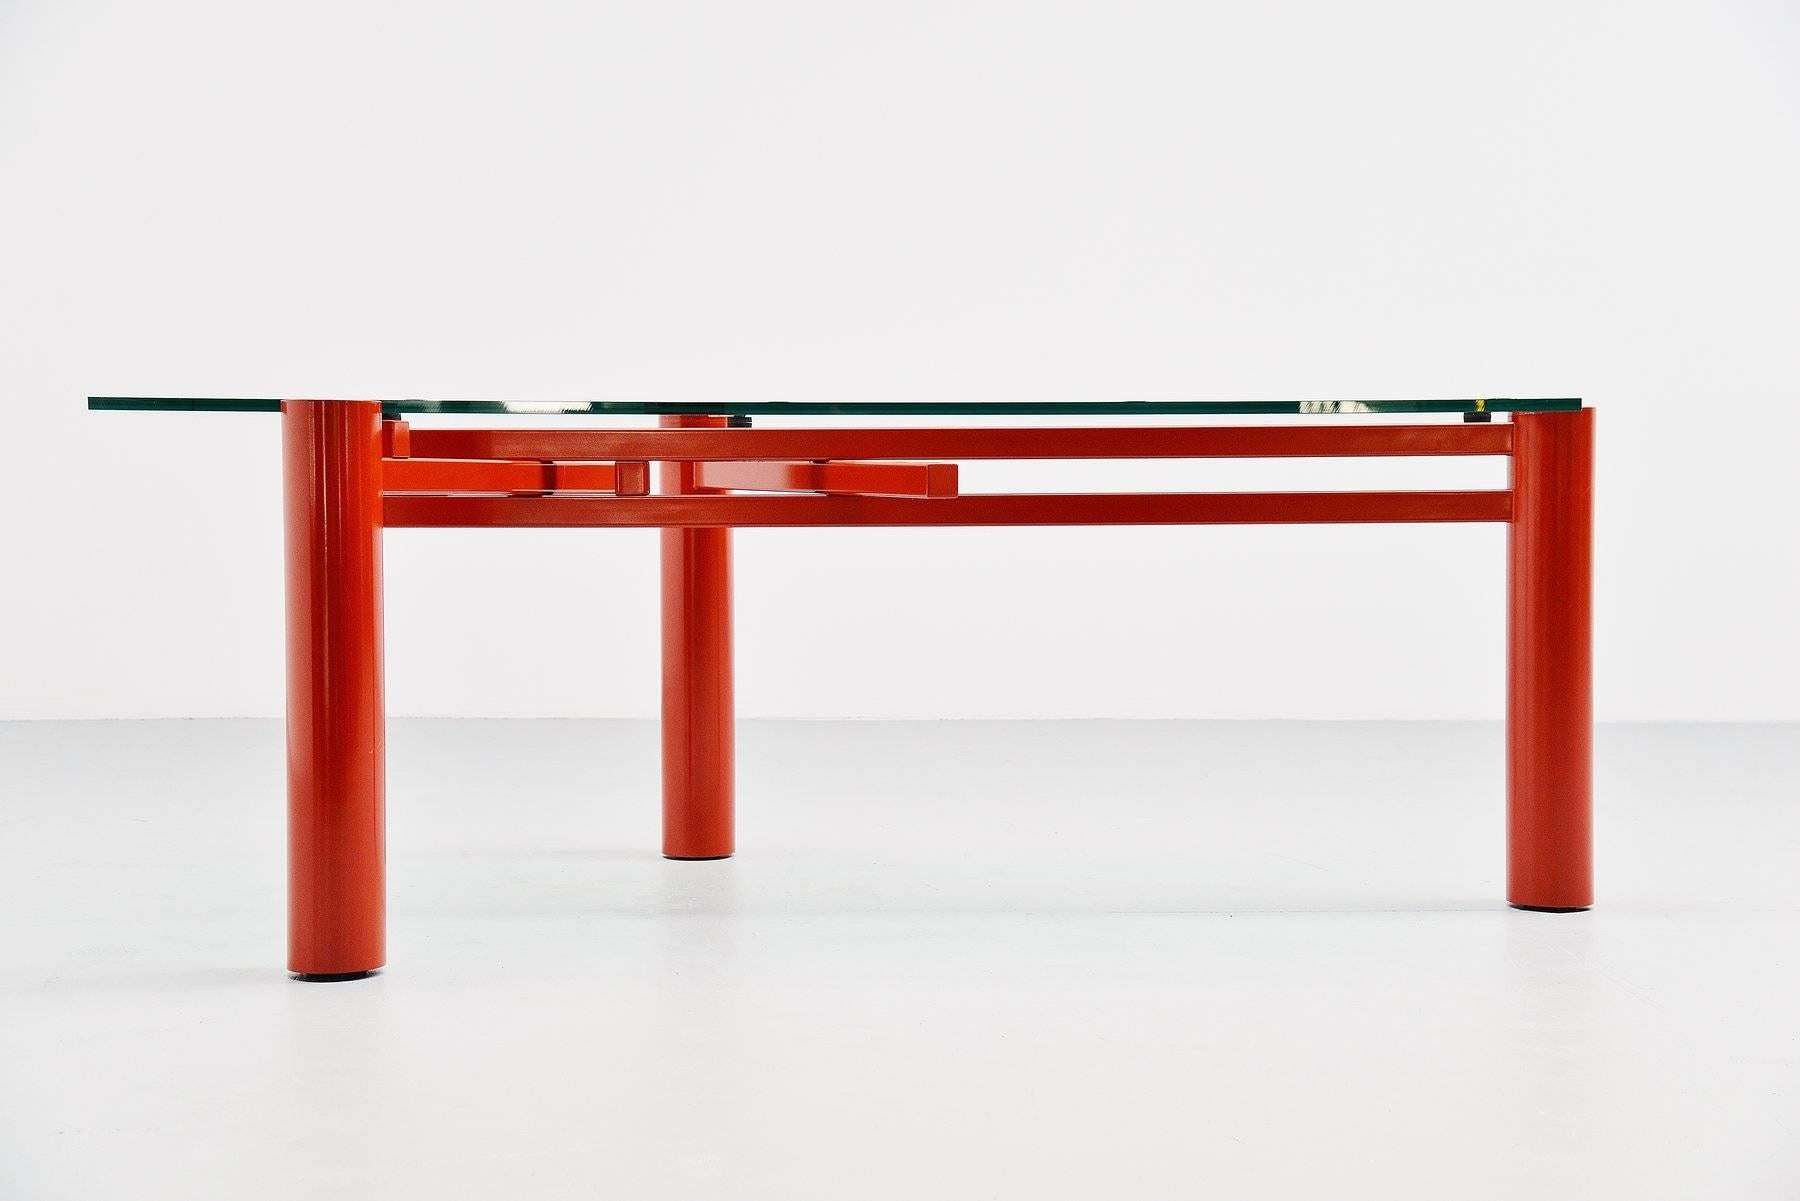 Super rare table designed by Christophe Gevers (1928-2007) produced by be. Classics, Belgium 2001. This extraordinary working table has an ingenious construction of 3 metal legs which slide in each other and create balance with the glass top on it